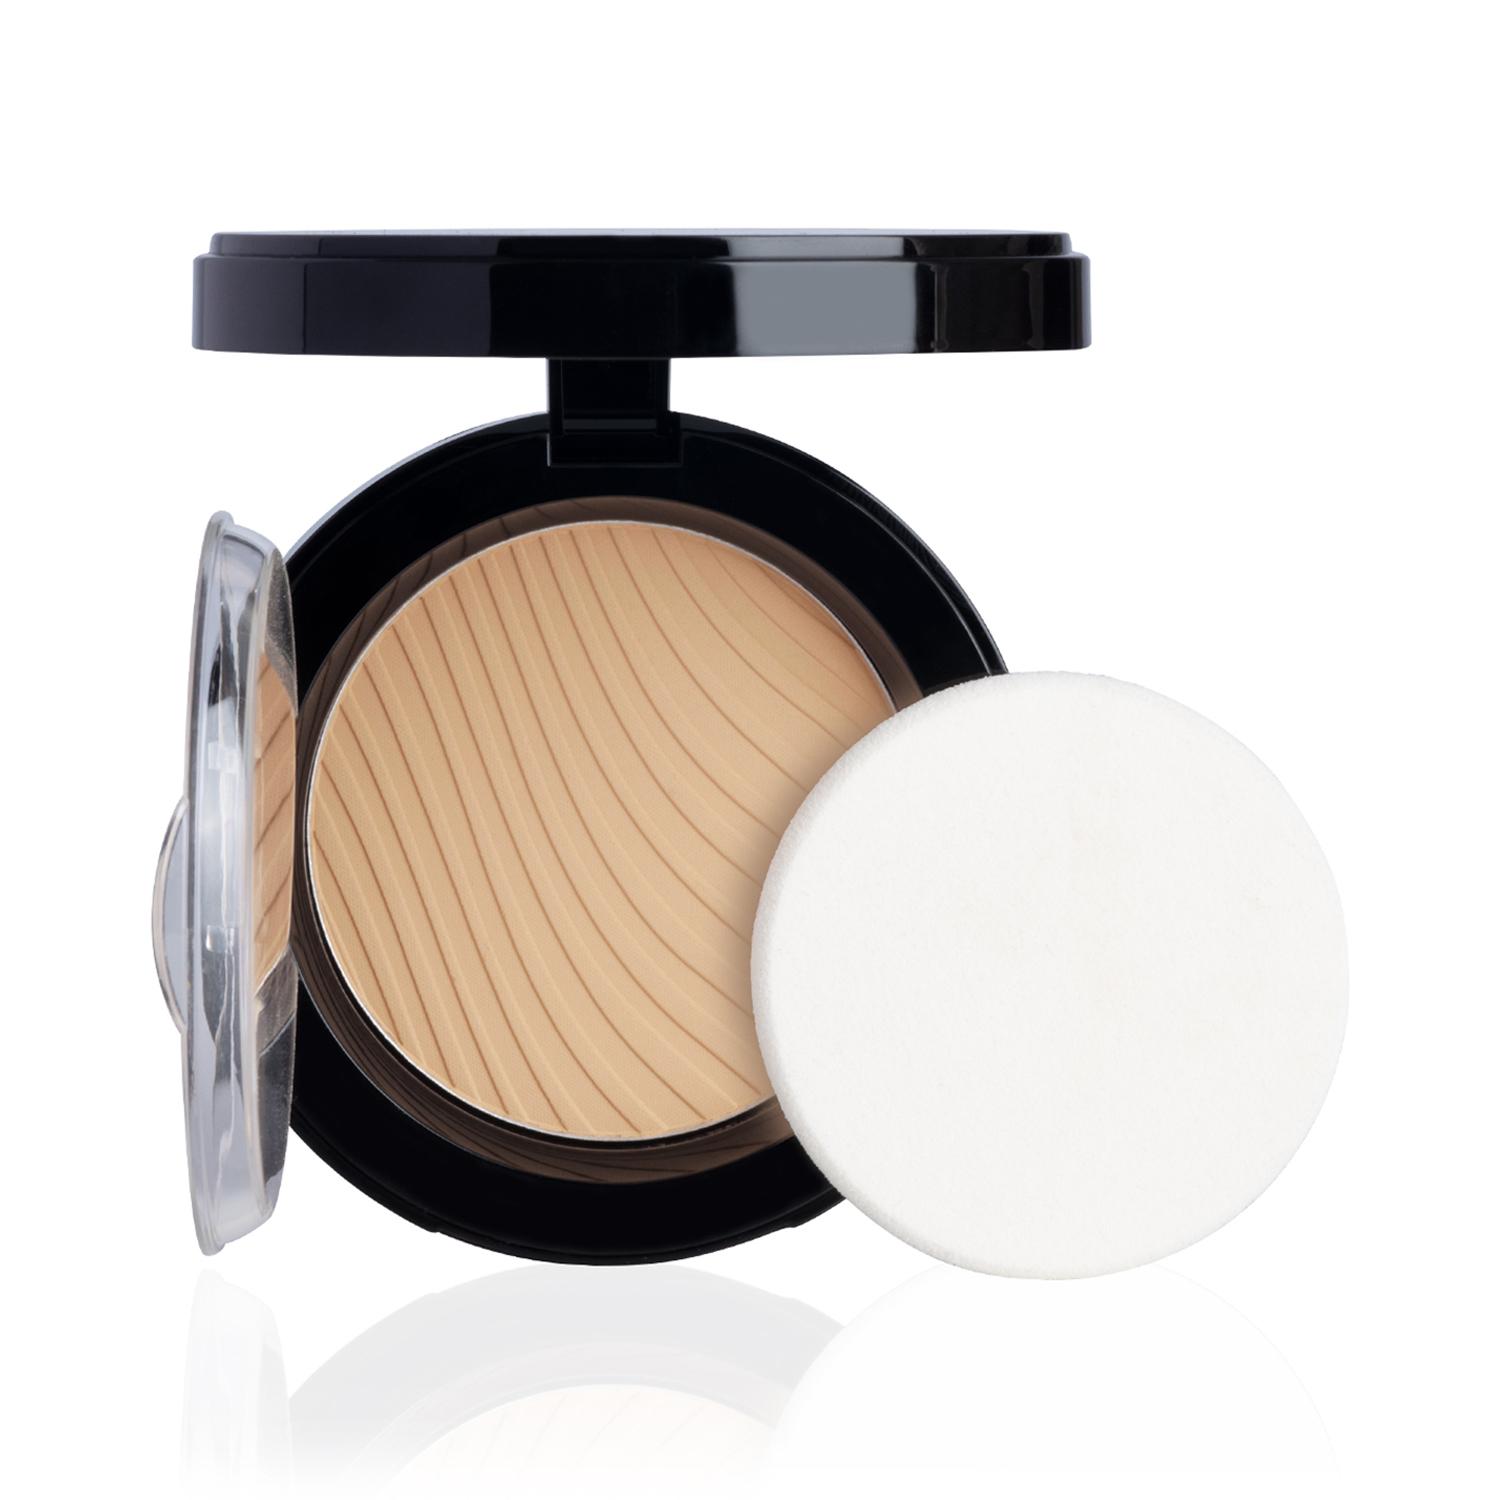 PAC | PAC Take Cover Compact Powder - 15 Dusky Diva (7.85g)